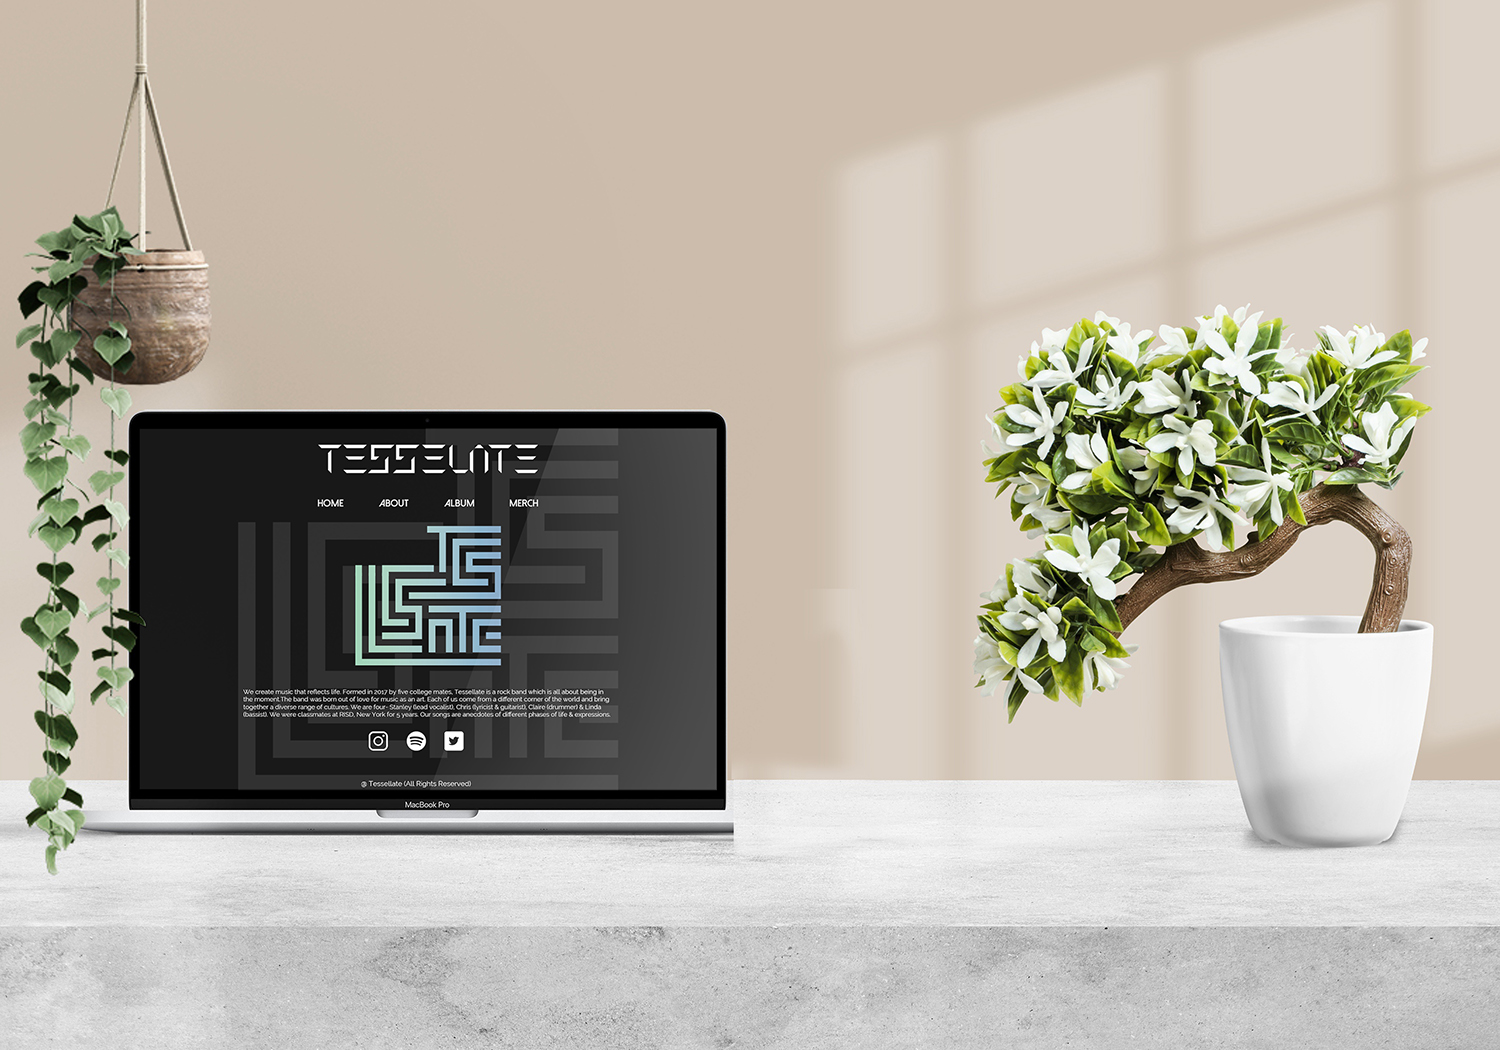 image of the homepage of Tessellate website